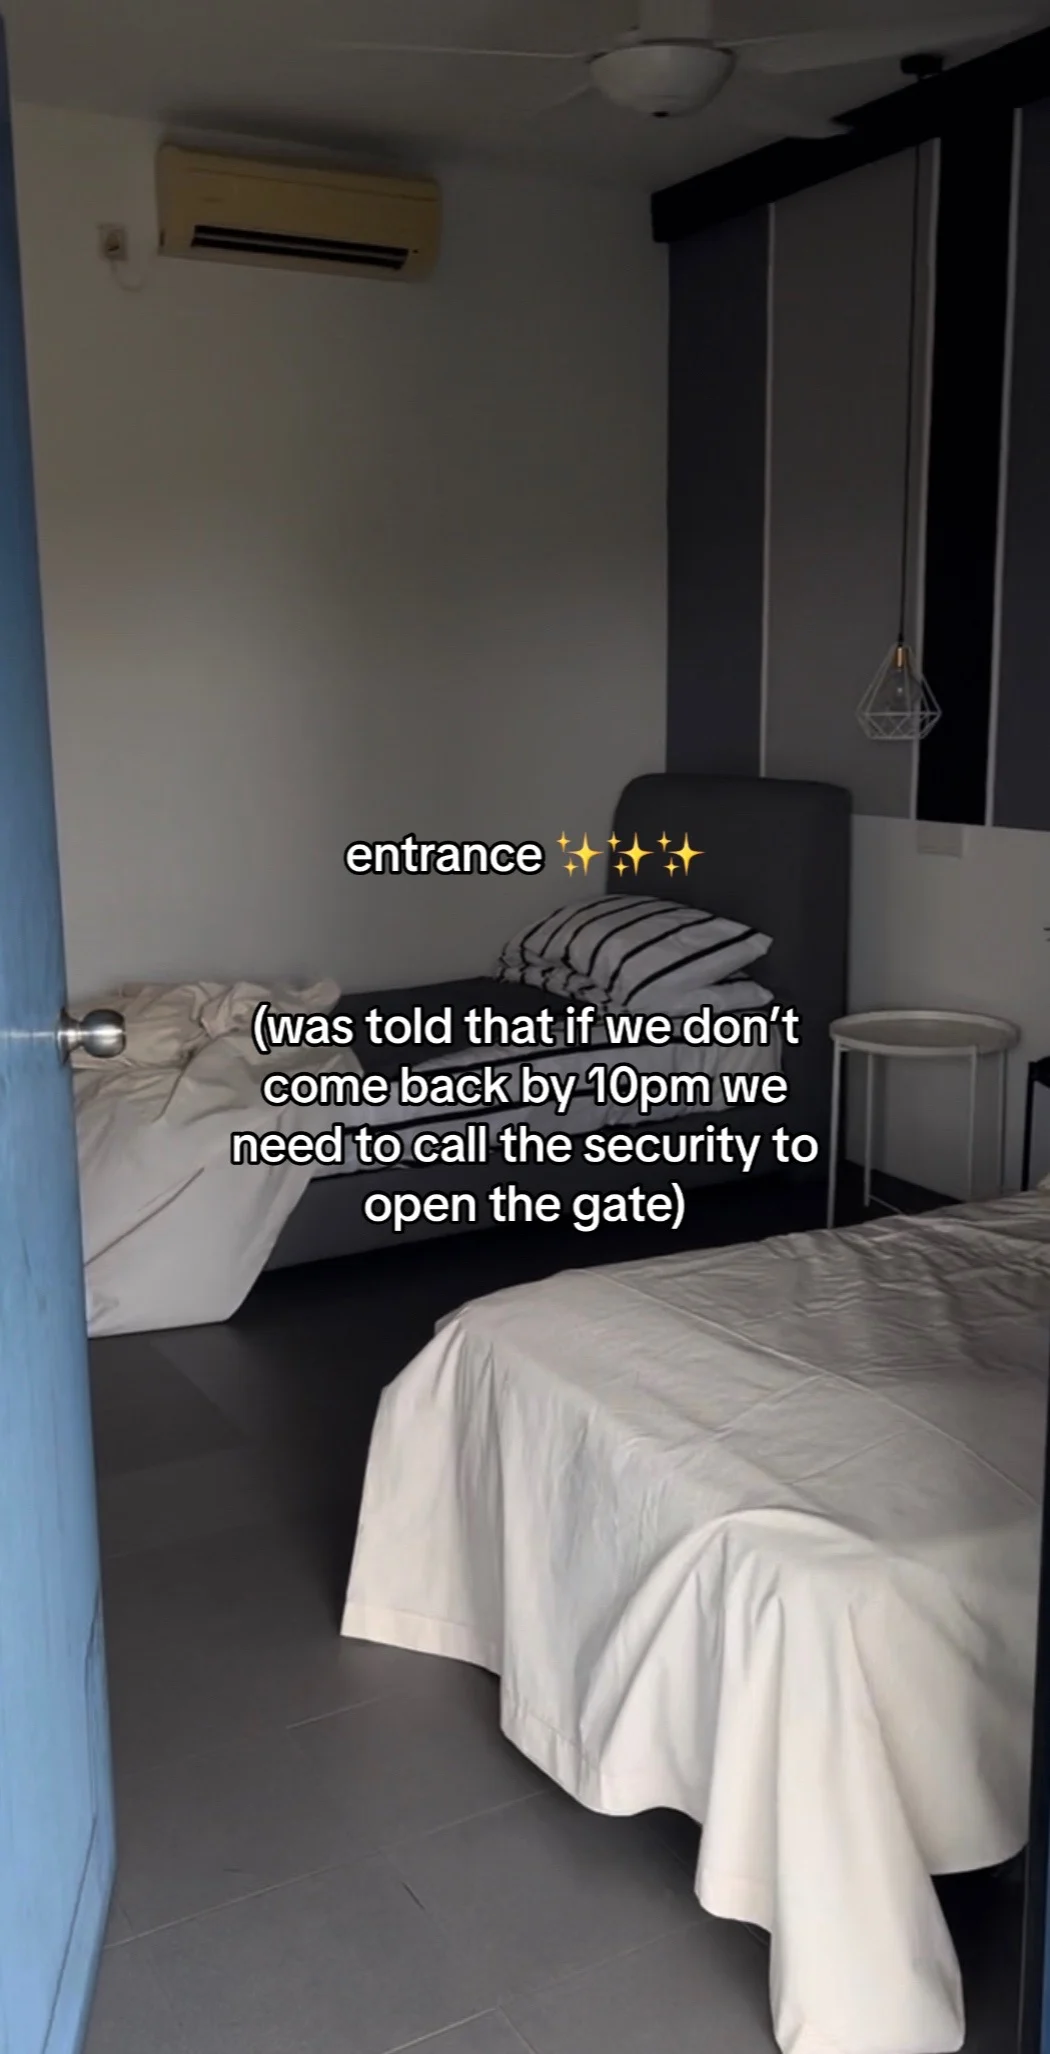 Woman checks into home for the disabled in jb by mistake via airbnb, netizens say it looks decent